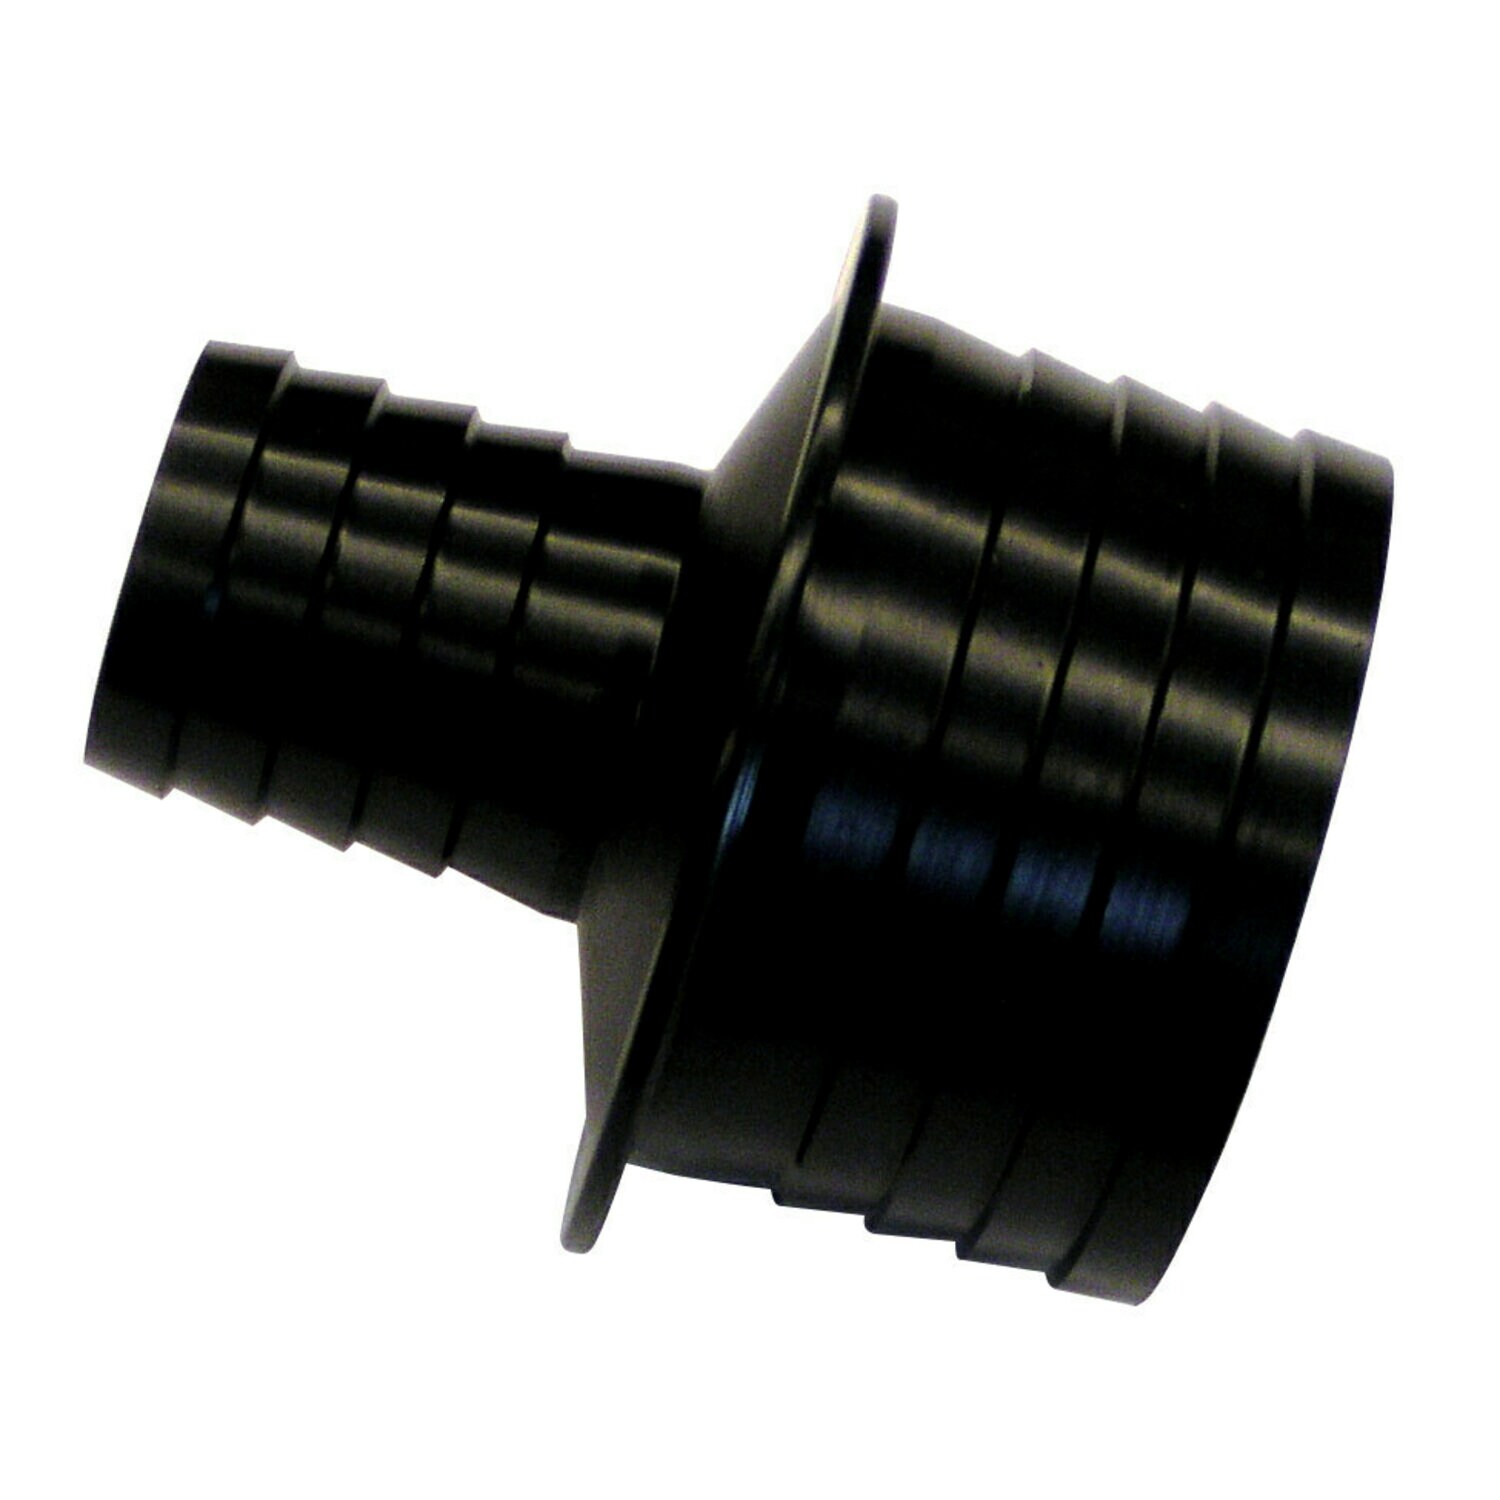 7000045310 - 3M Vacuum Hose Adapter 30439, 1 in ID to 2 in ID